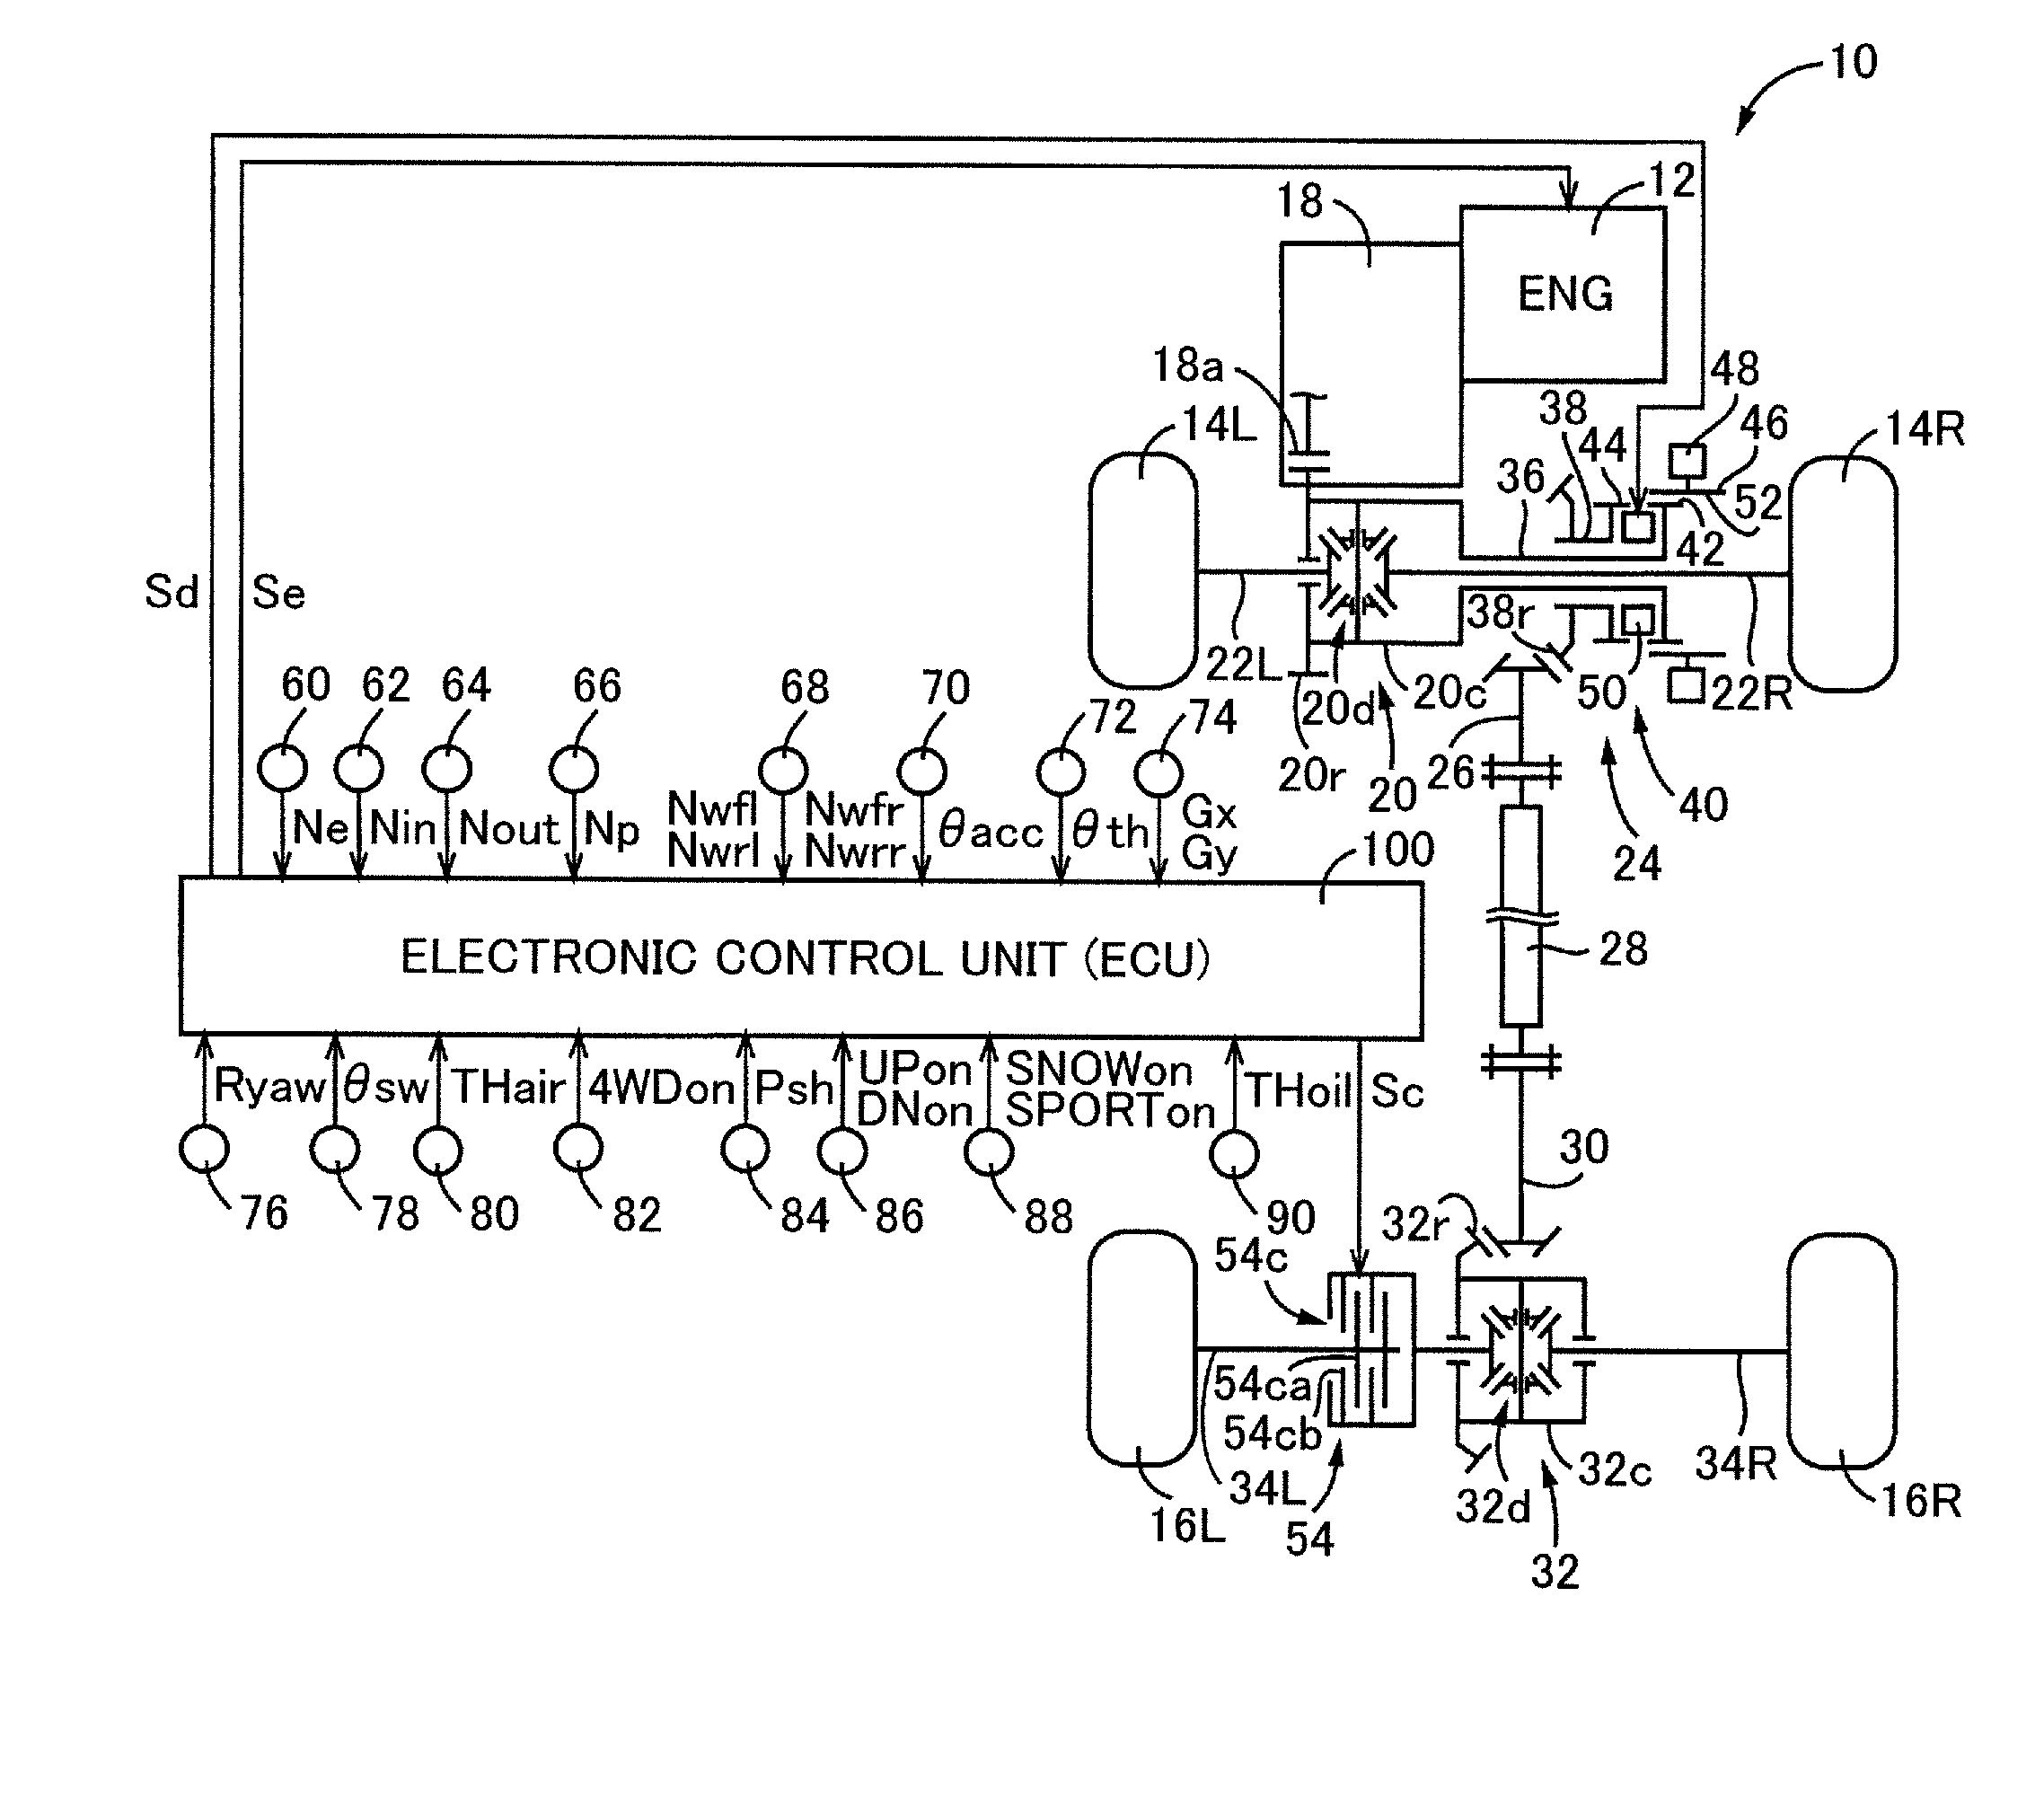 Control device for 4wd vehicle